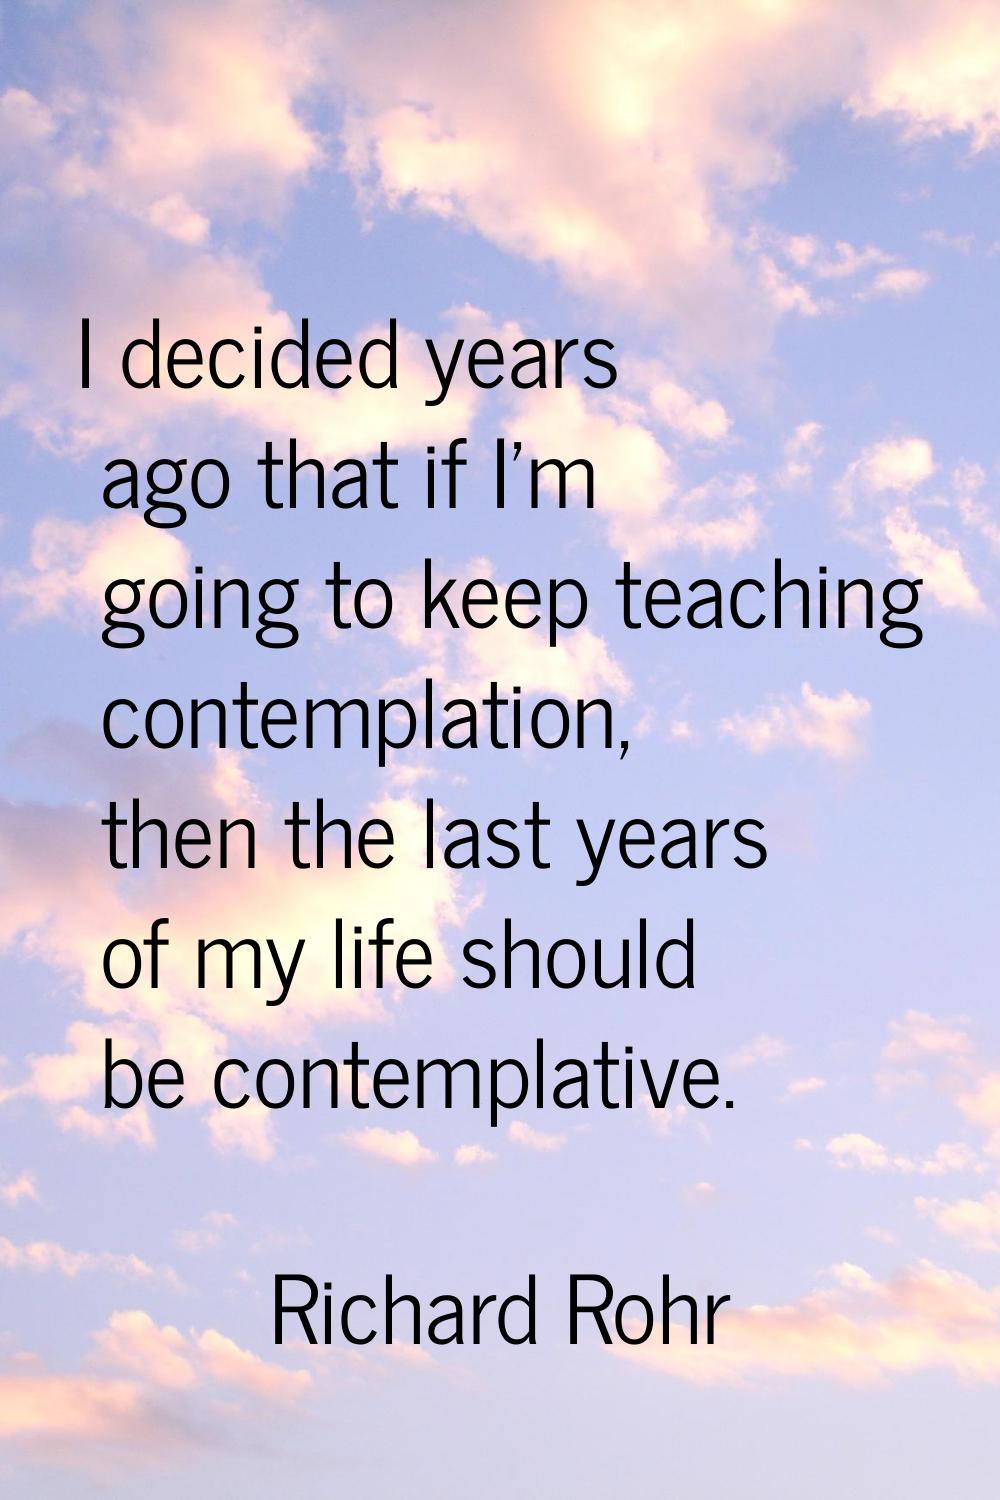 I decided years ago that if I'm going to keep teaching contemplation, then the last years of my lif